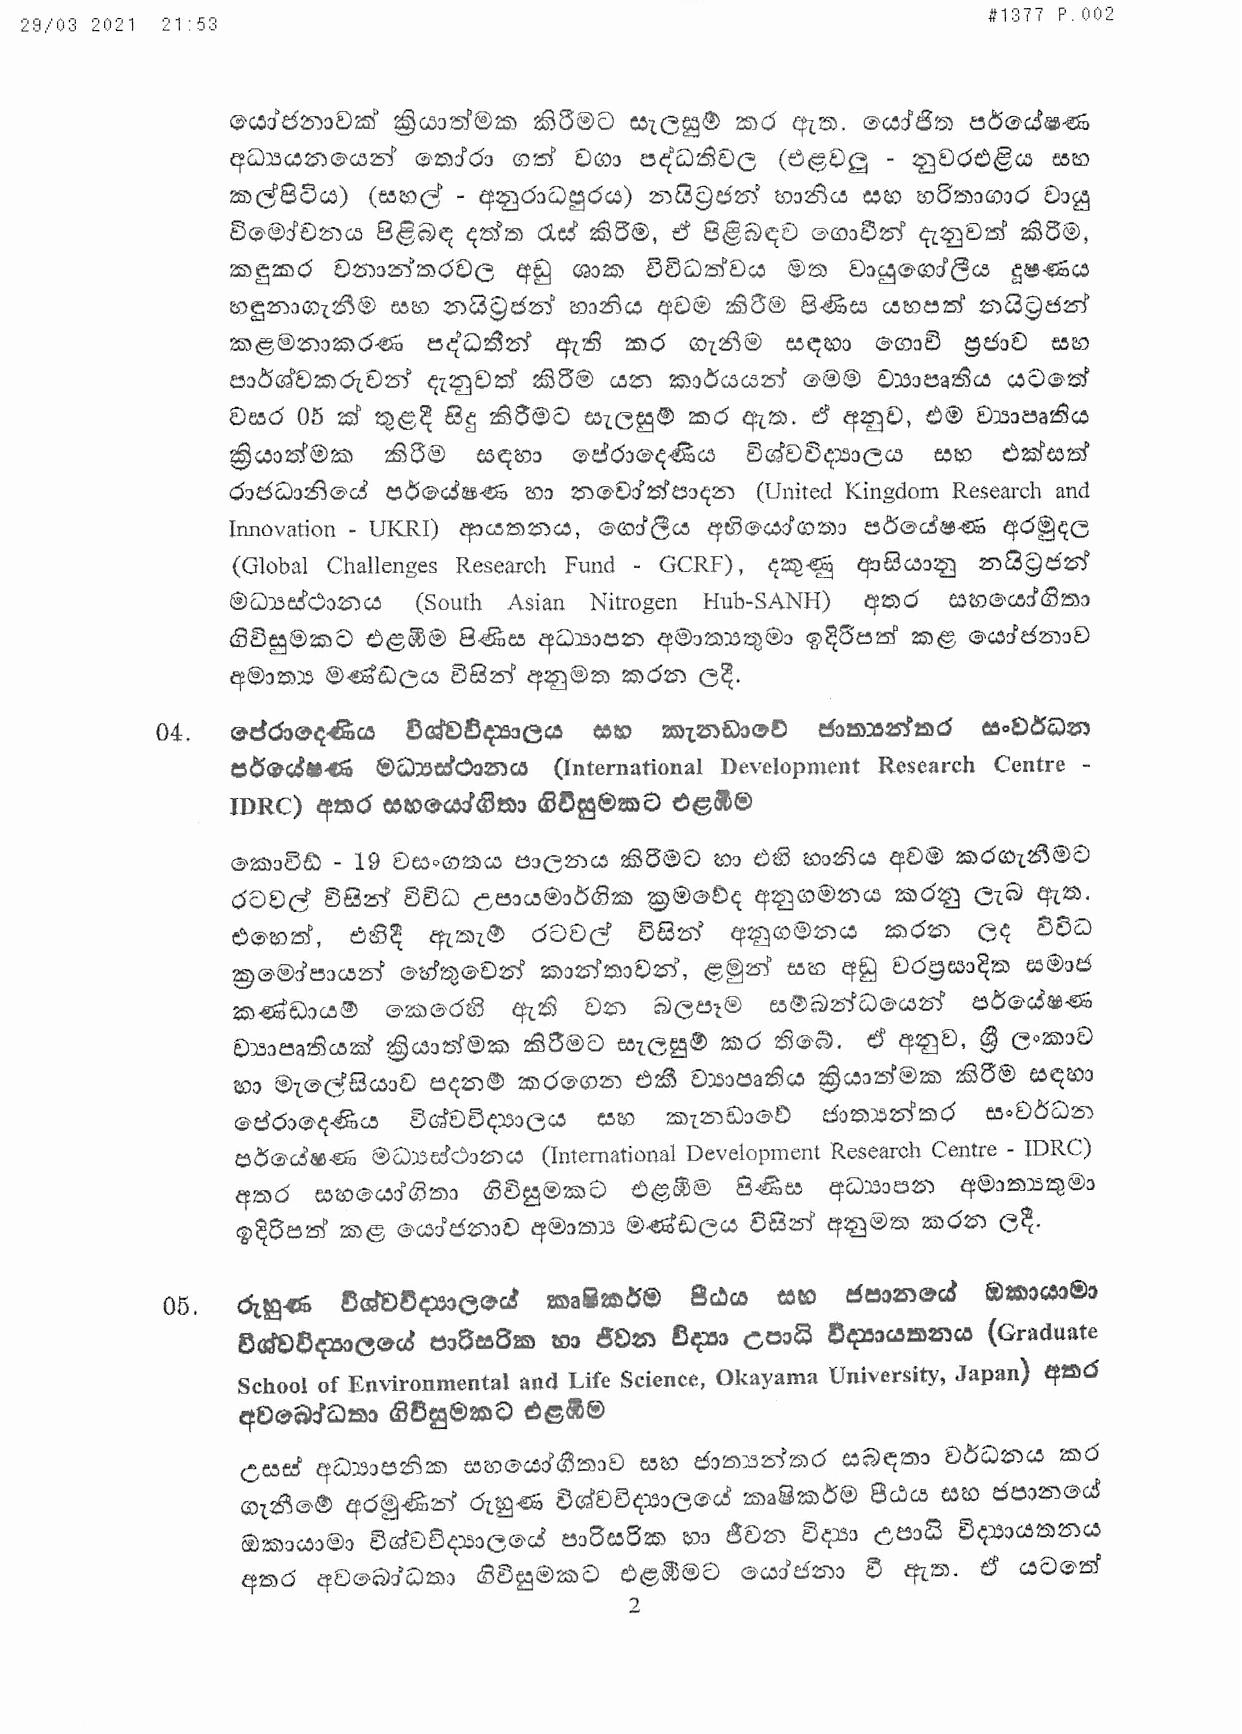 Cabinet Decision on 29.03.2021 1 page 002